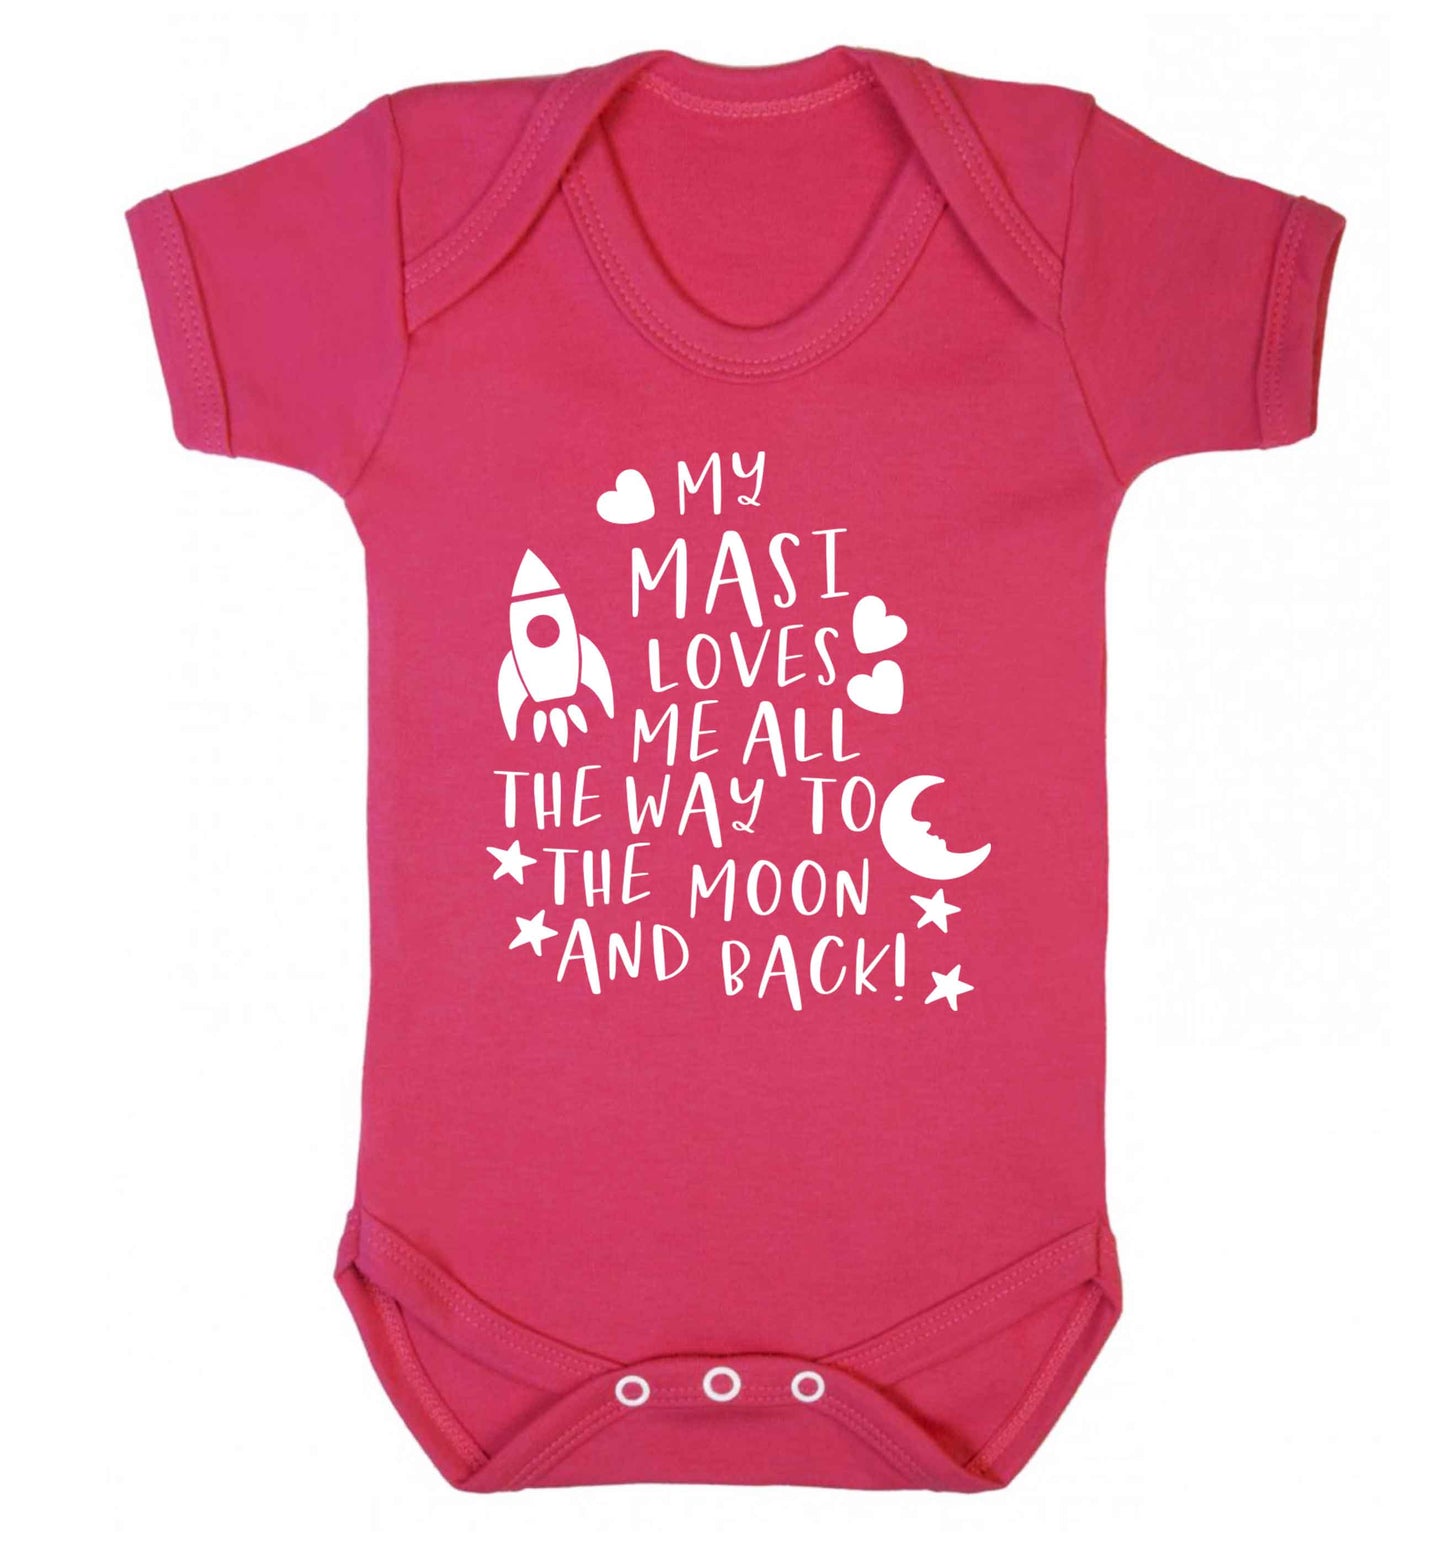 My masi loves me all the way to the moon and back Baby Vest dark pink 18-24 months